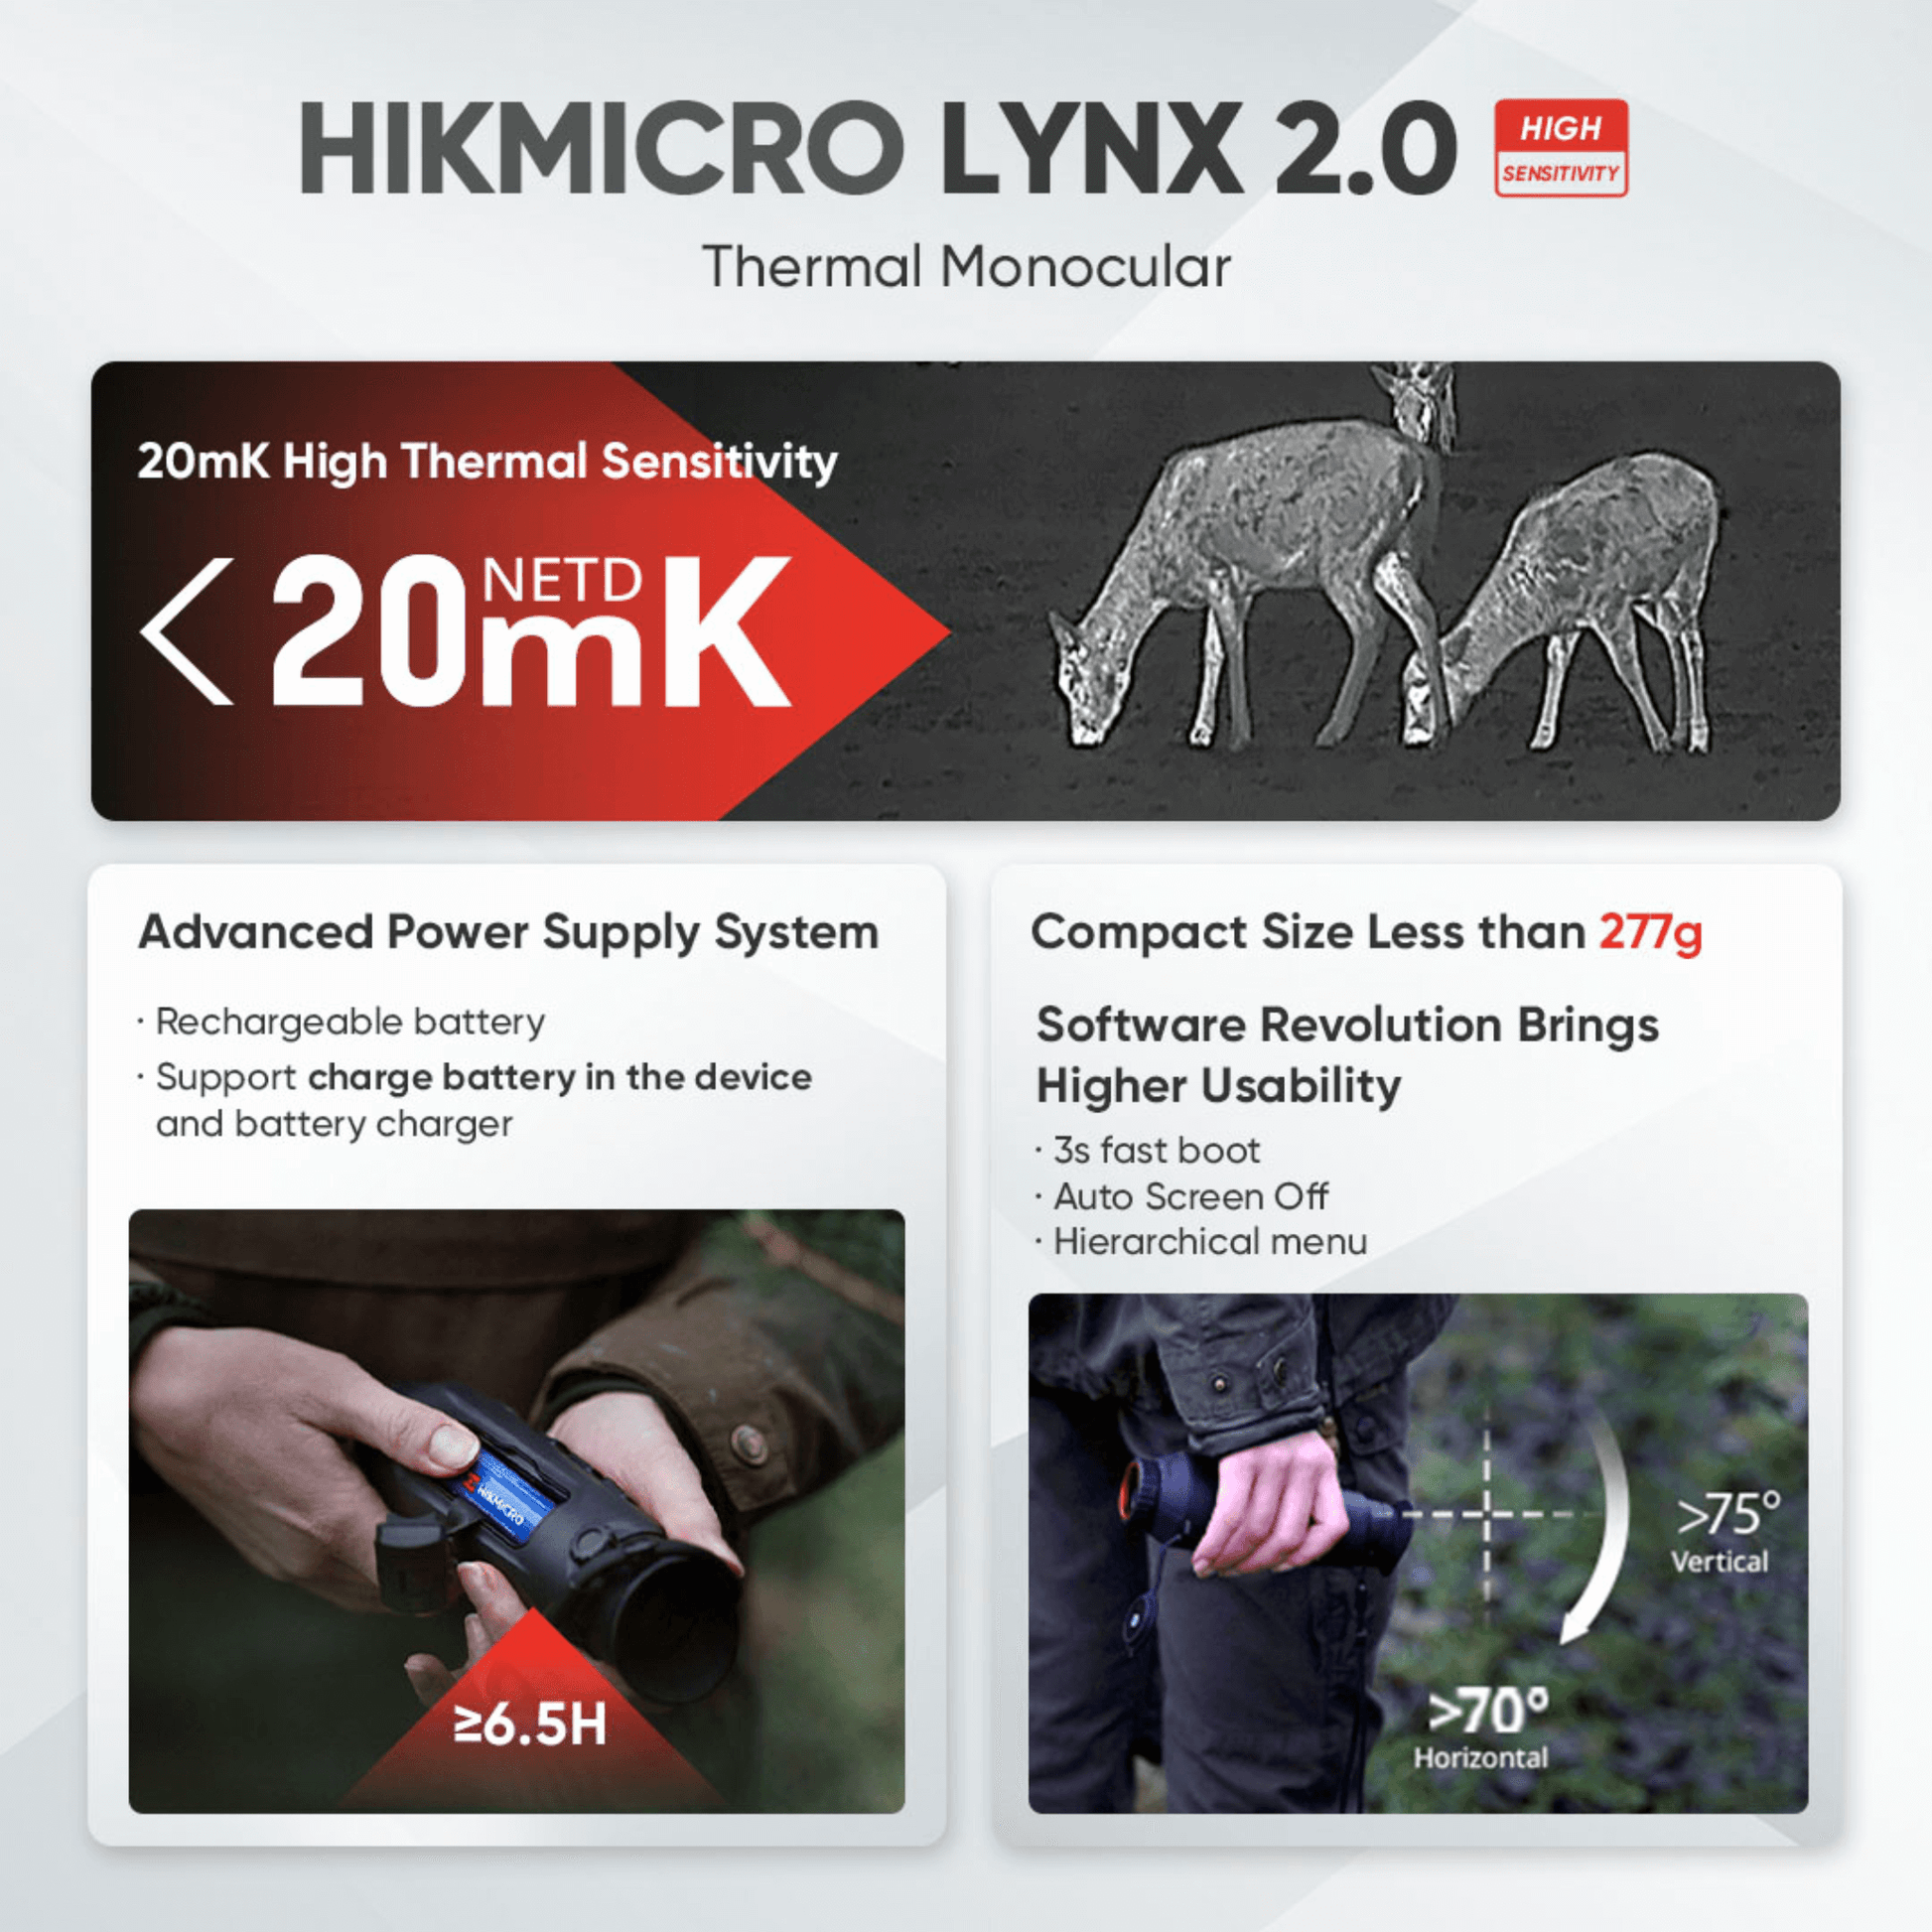 HikMicro Lynx LH25 2.0 Monocular new product features